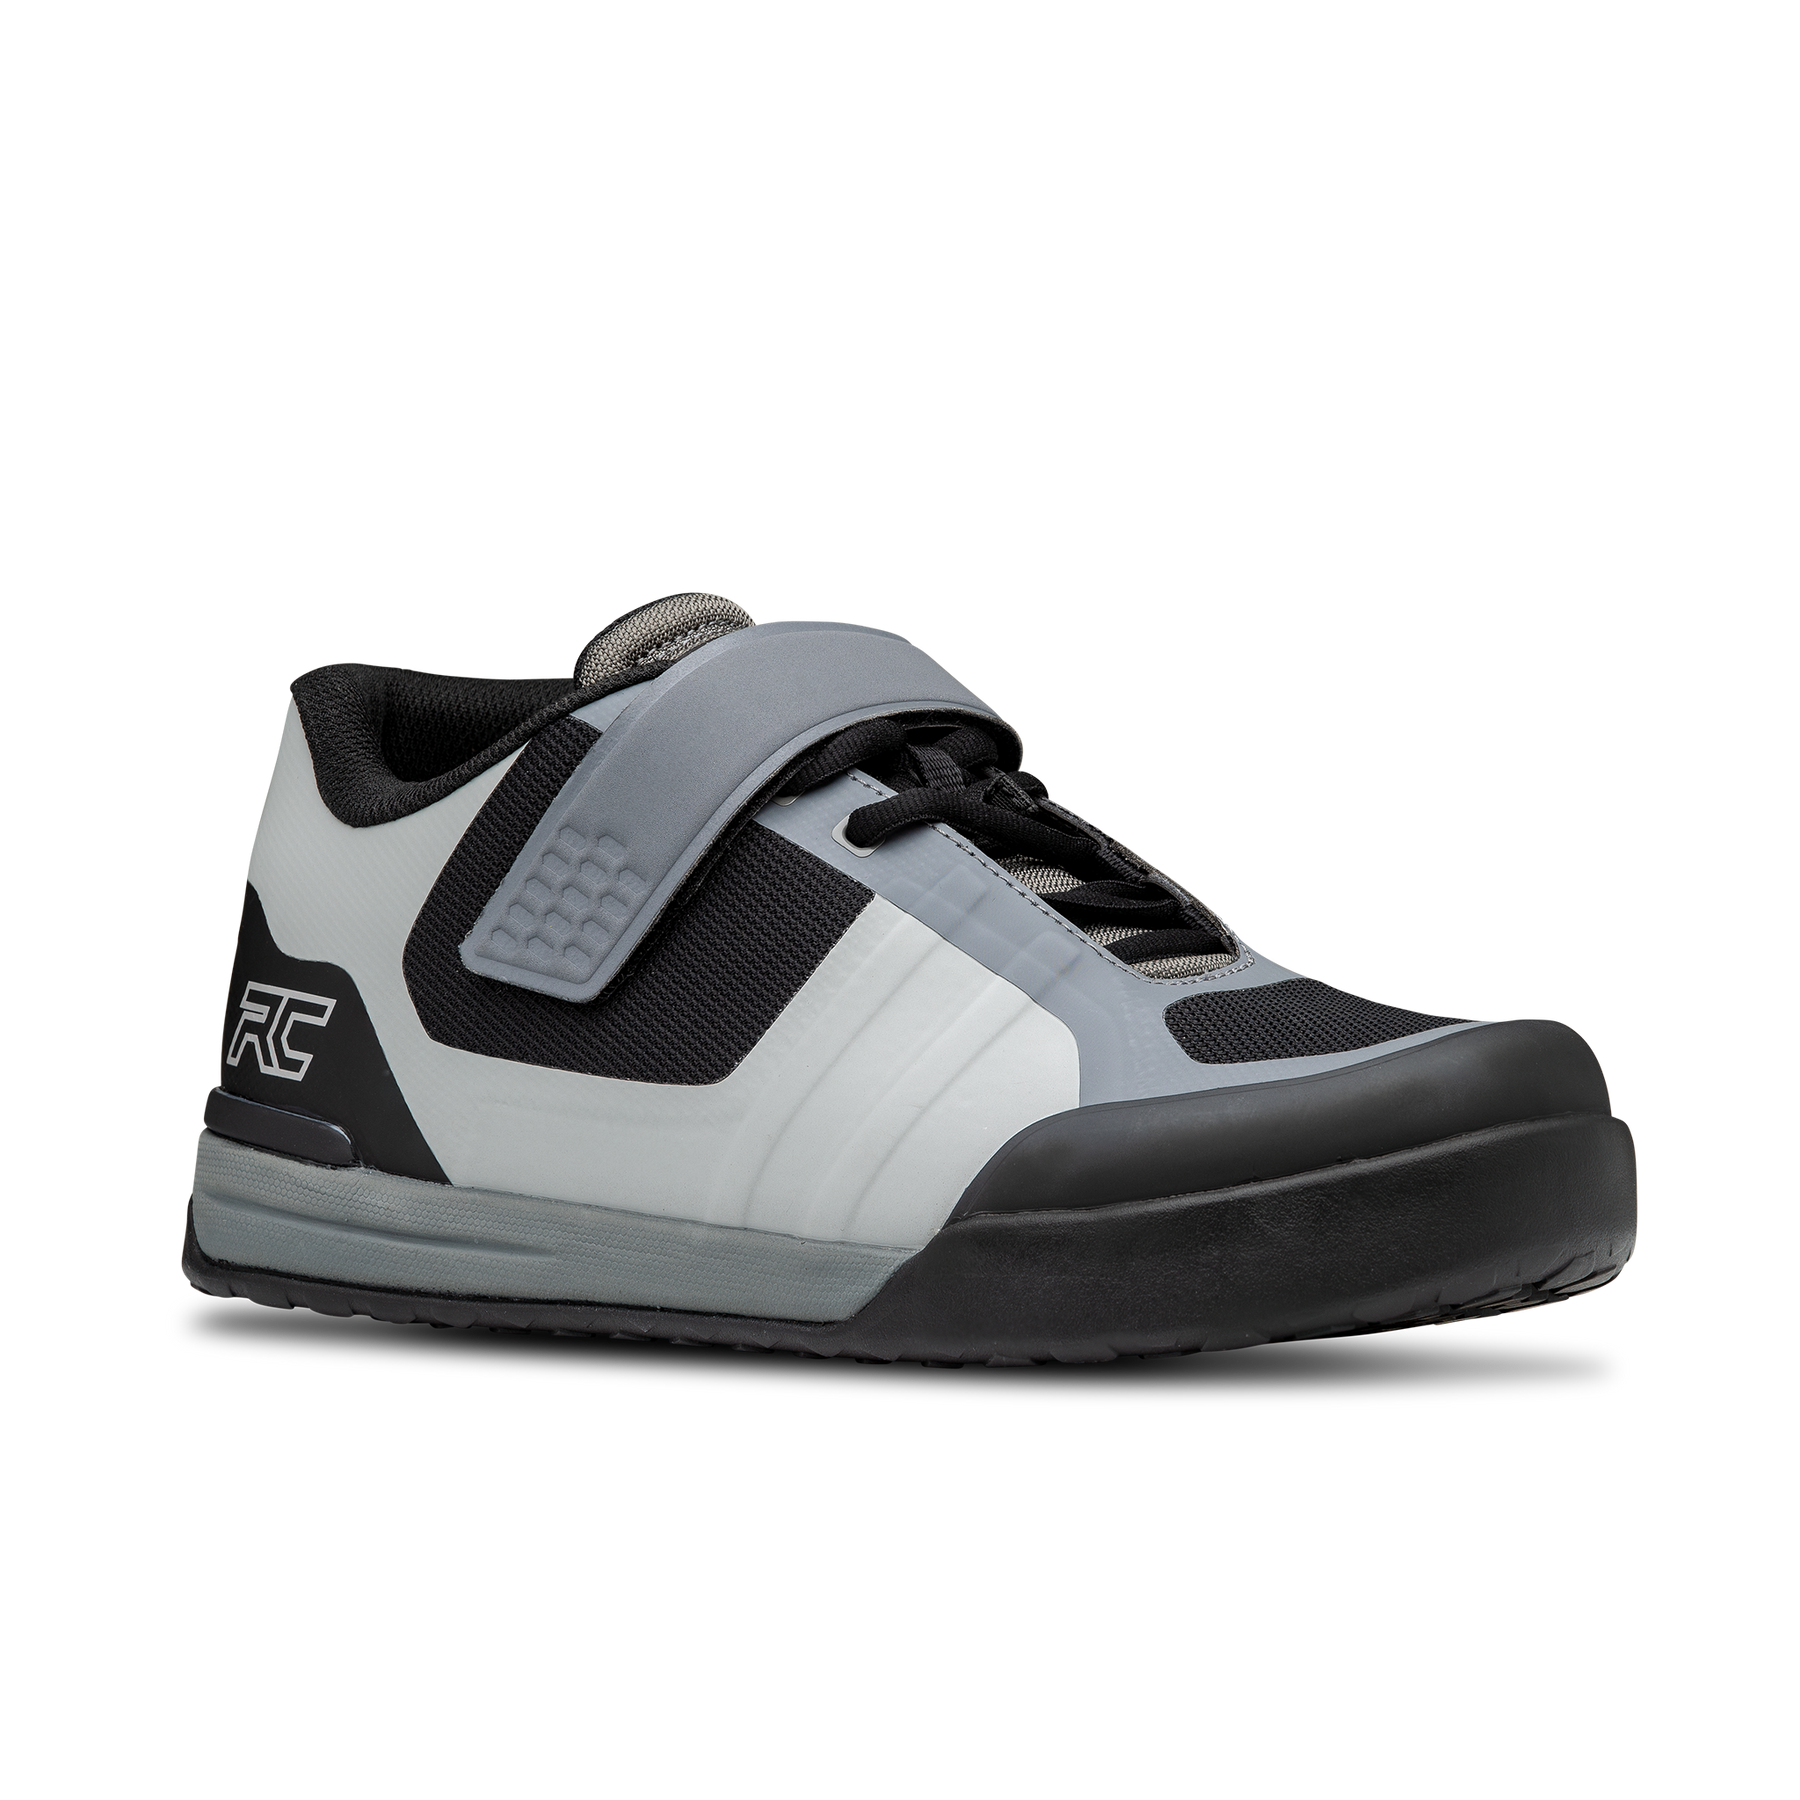 Ride Concepts Transition Spd Shoes - US 11.5 - Charcoal - Grey - Image 1